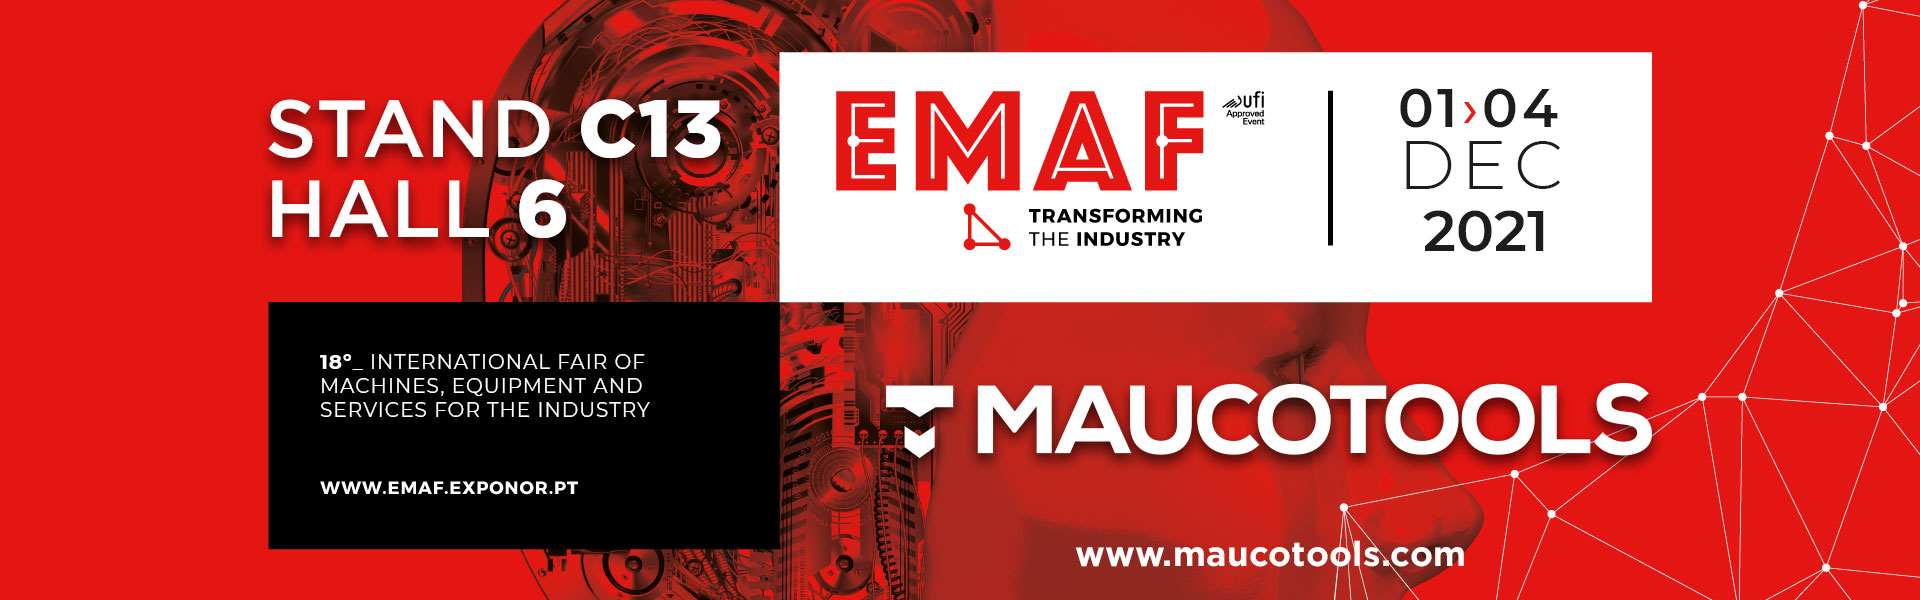 EMAF 2021: MAUCOTOOLS WILL BE IN PORTUGAL!